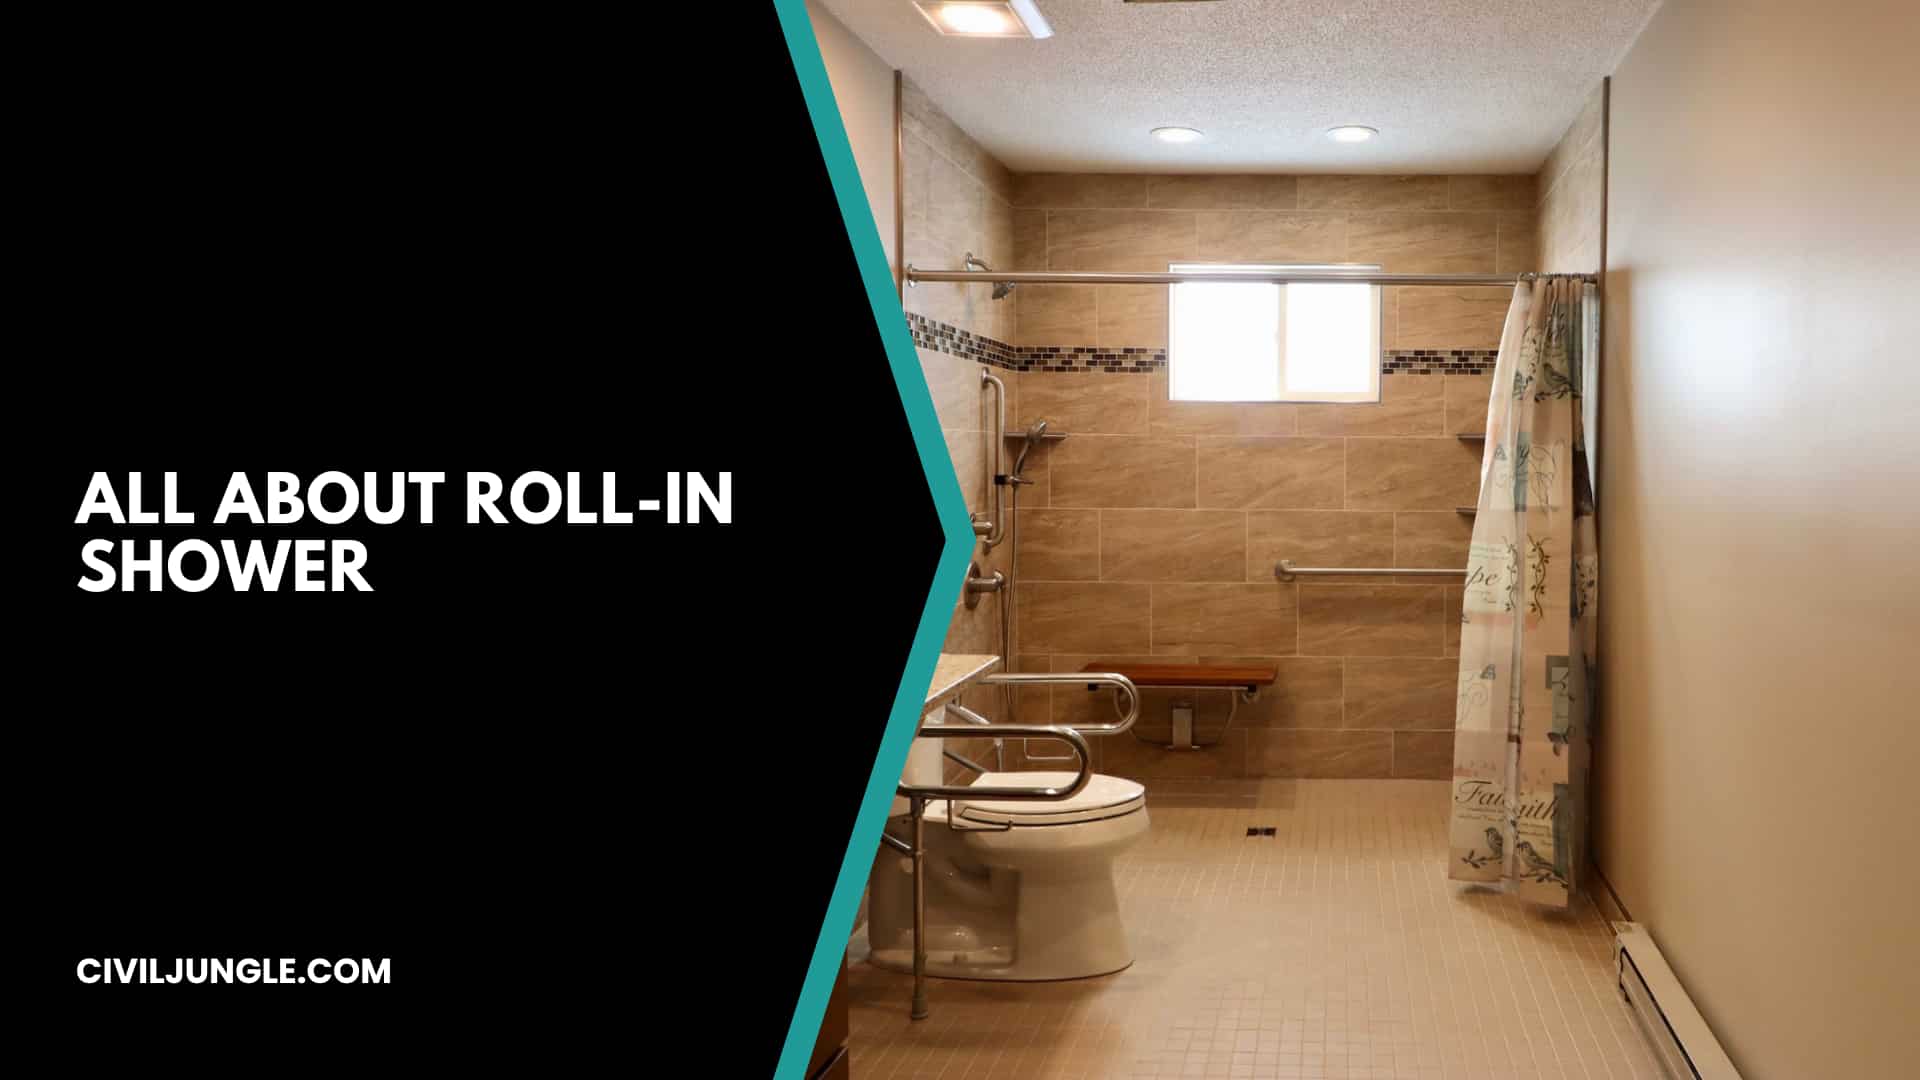 All About Roll-in Shower